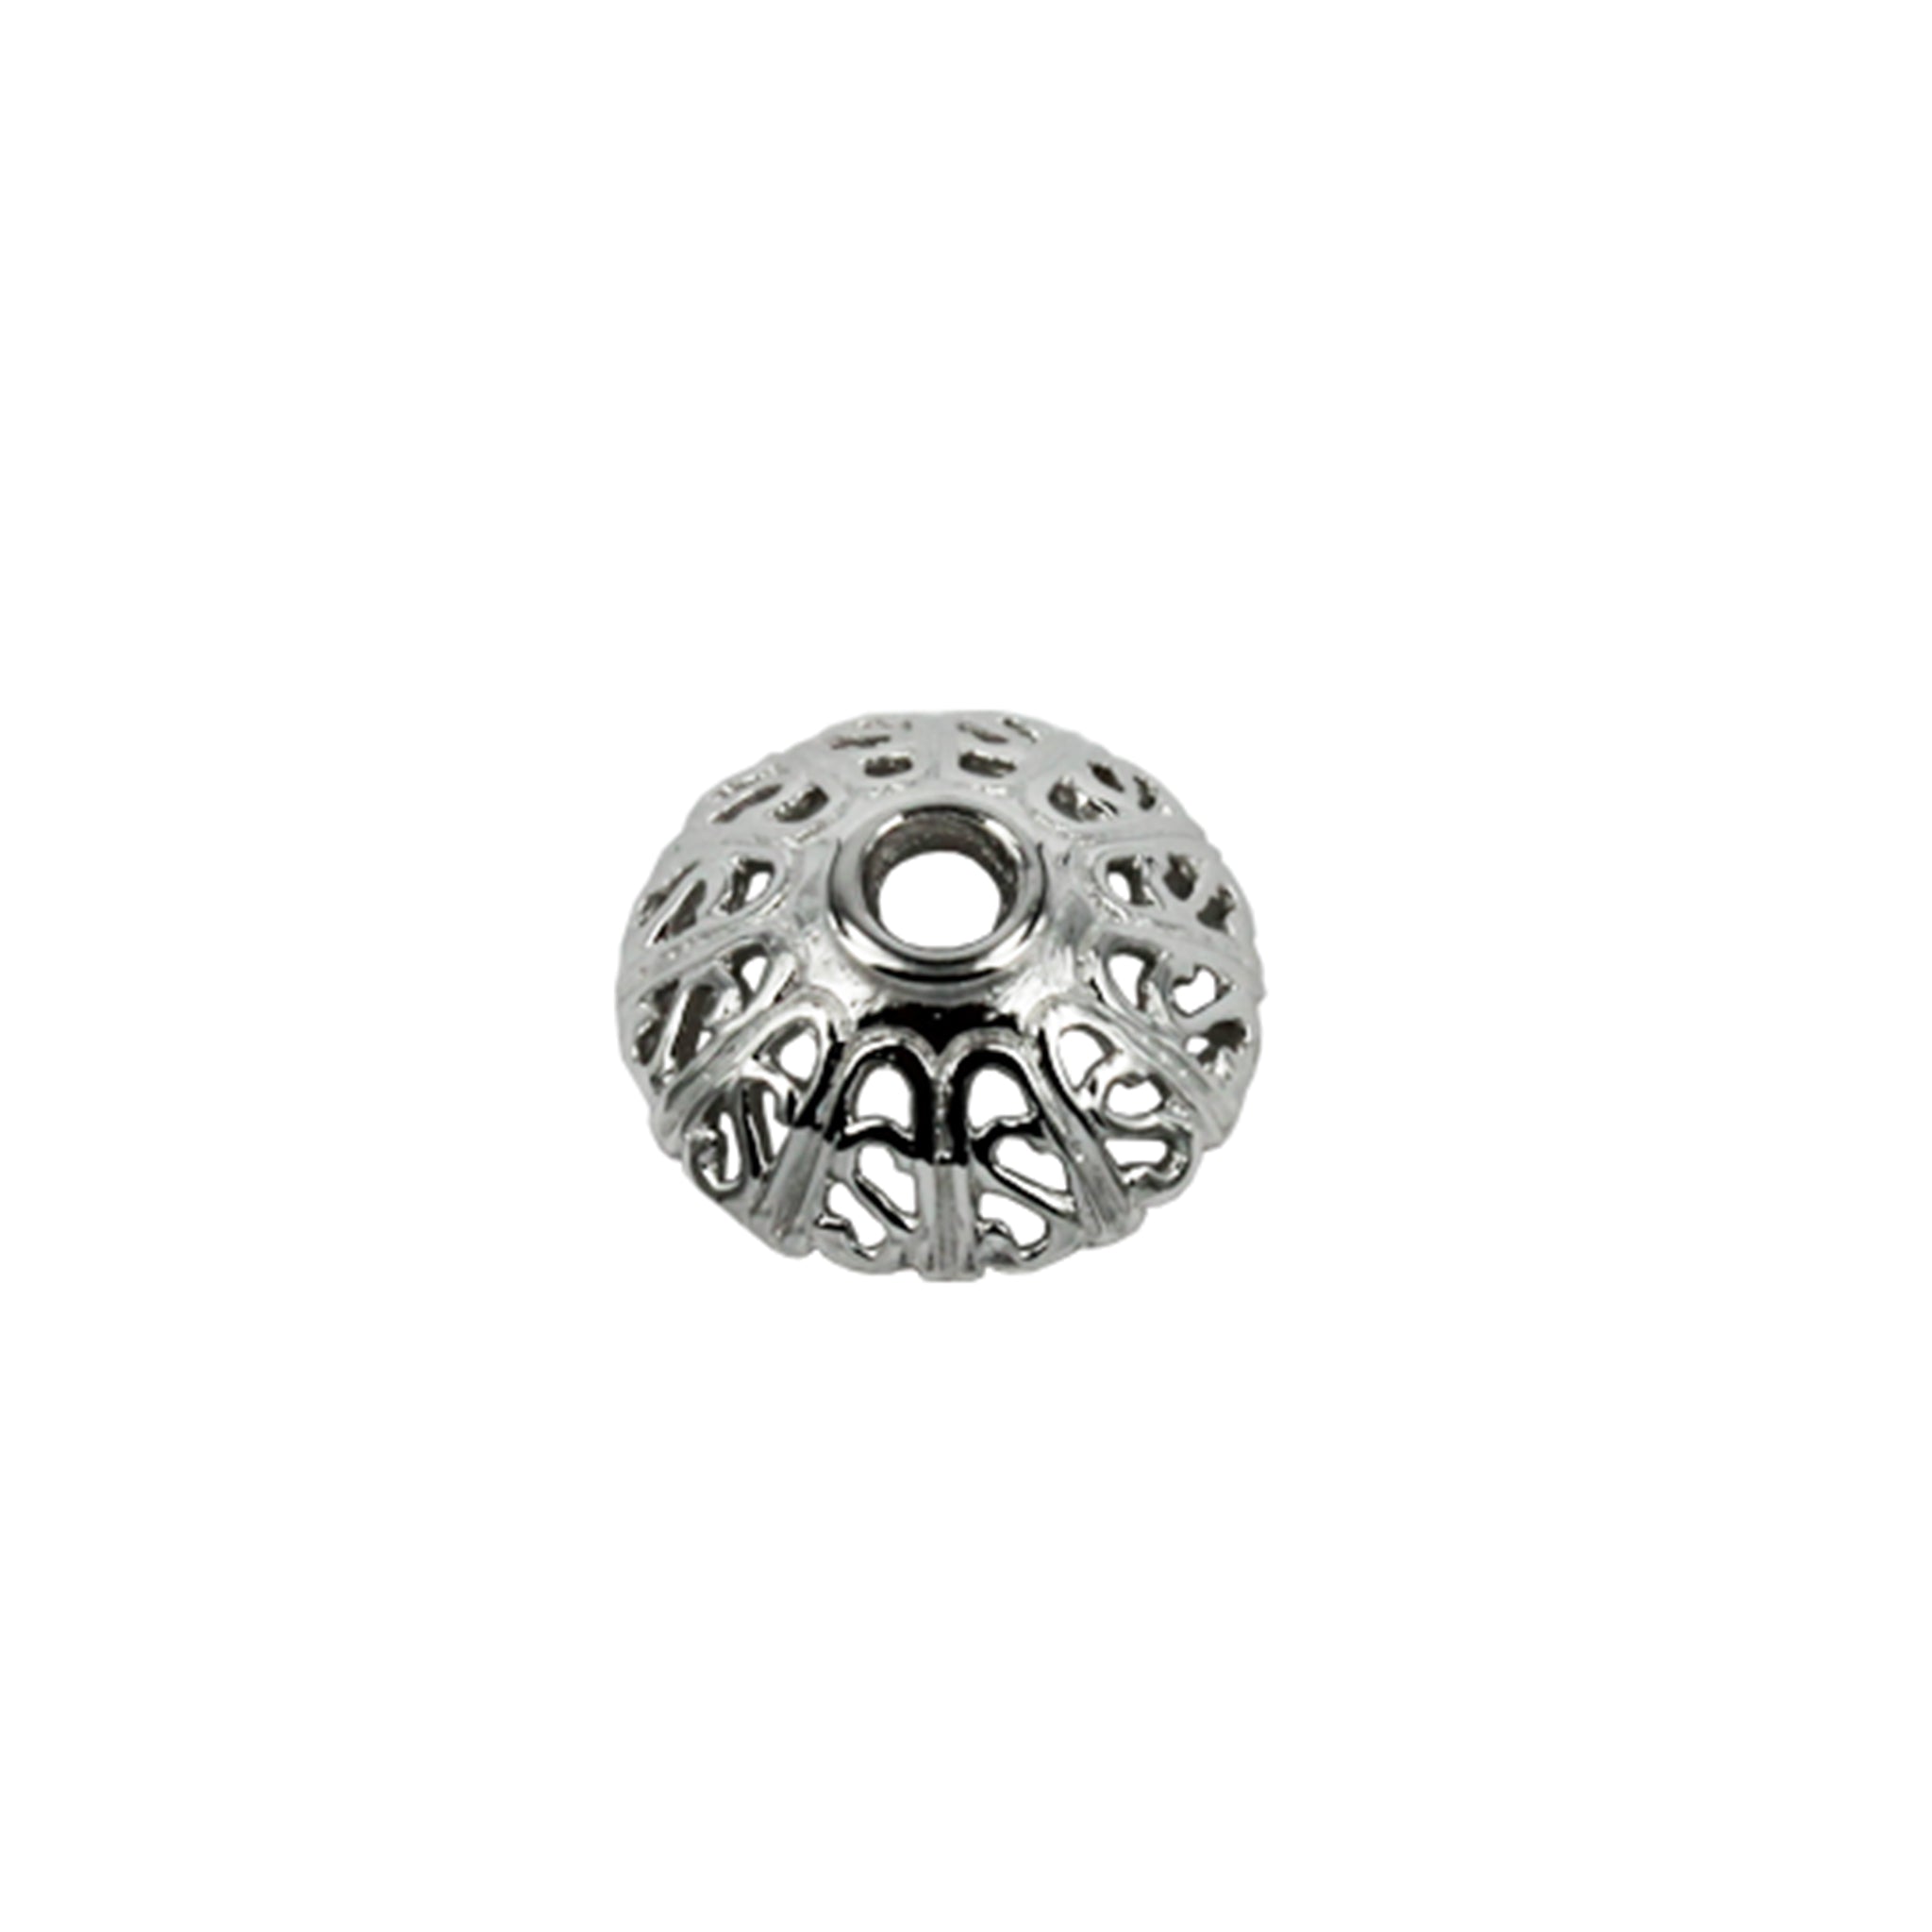 Silvia Wheel Scalloped Bead Cap in Sterling Silver 14x2.4mm